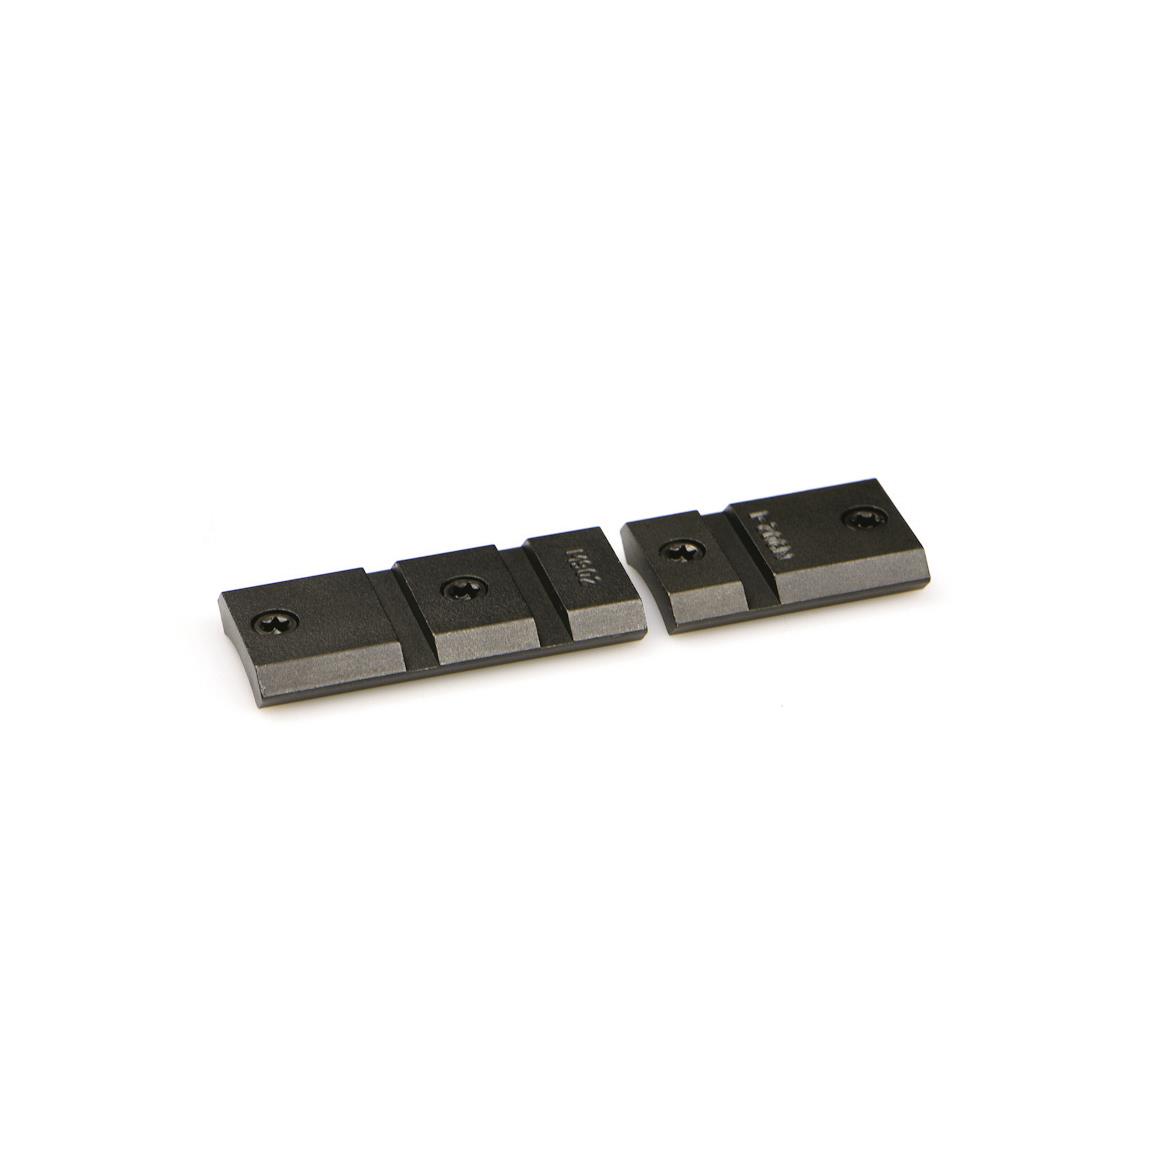 Warne M902 / 902M Low Profile Base For Savage, Ruger, TC Venture, Remington and Axix models